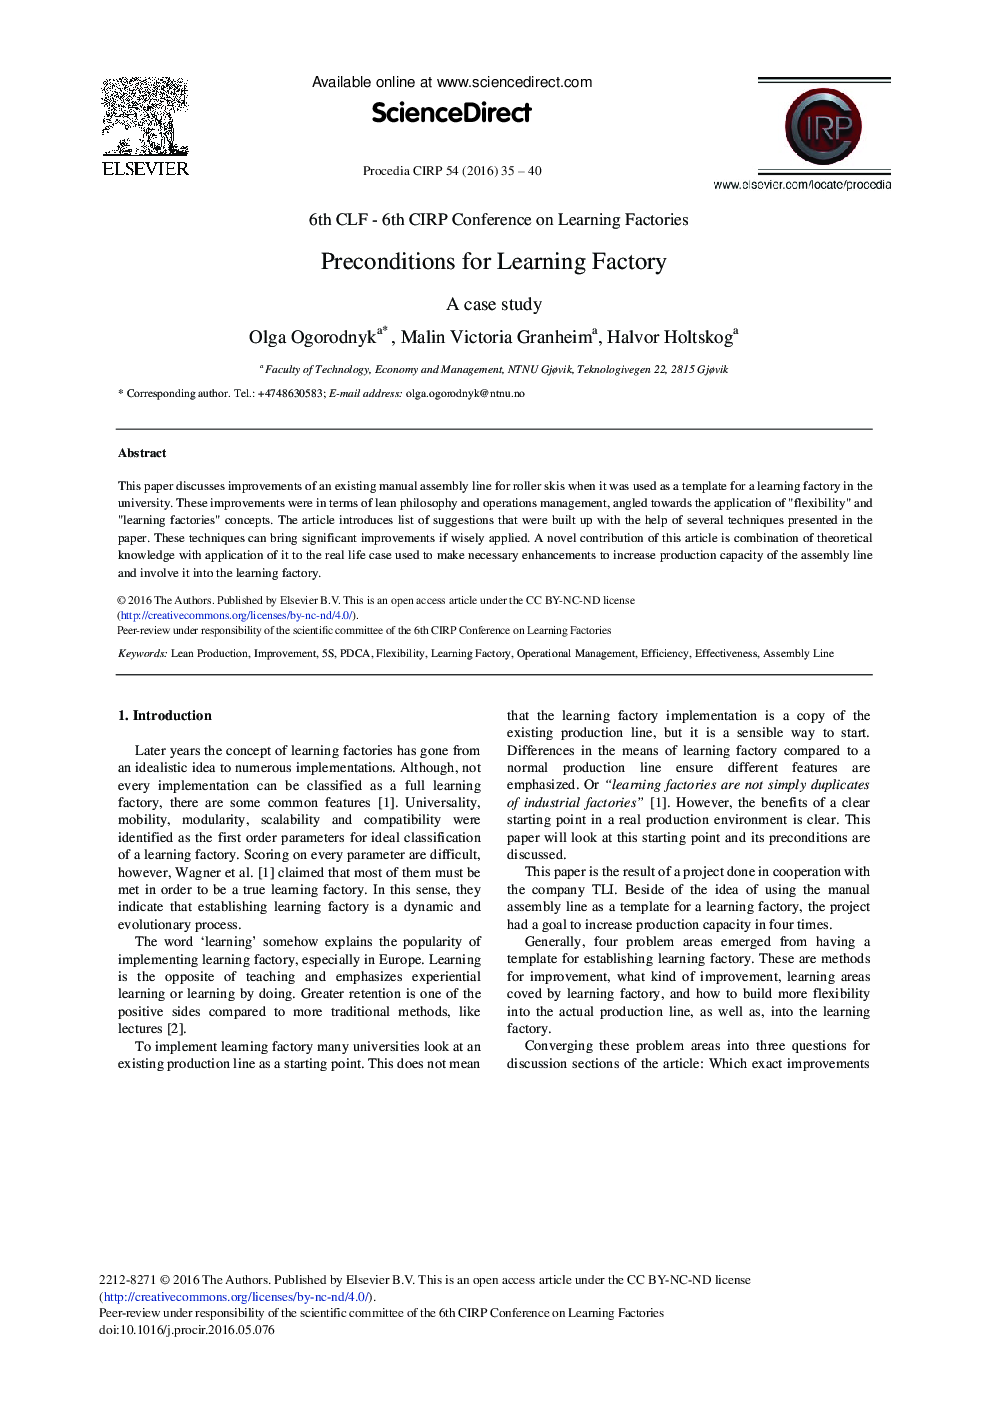 Preconditions for Learning Factory A Case Study